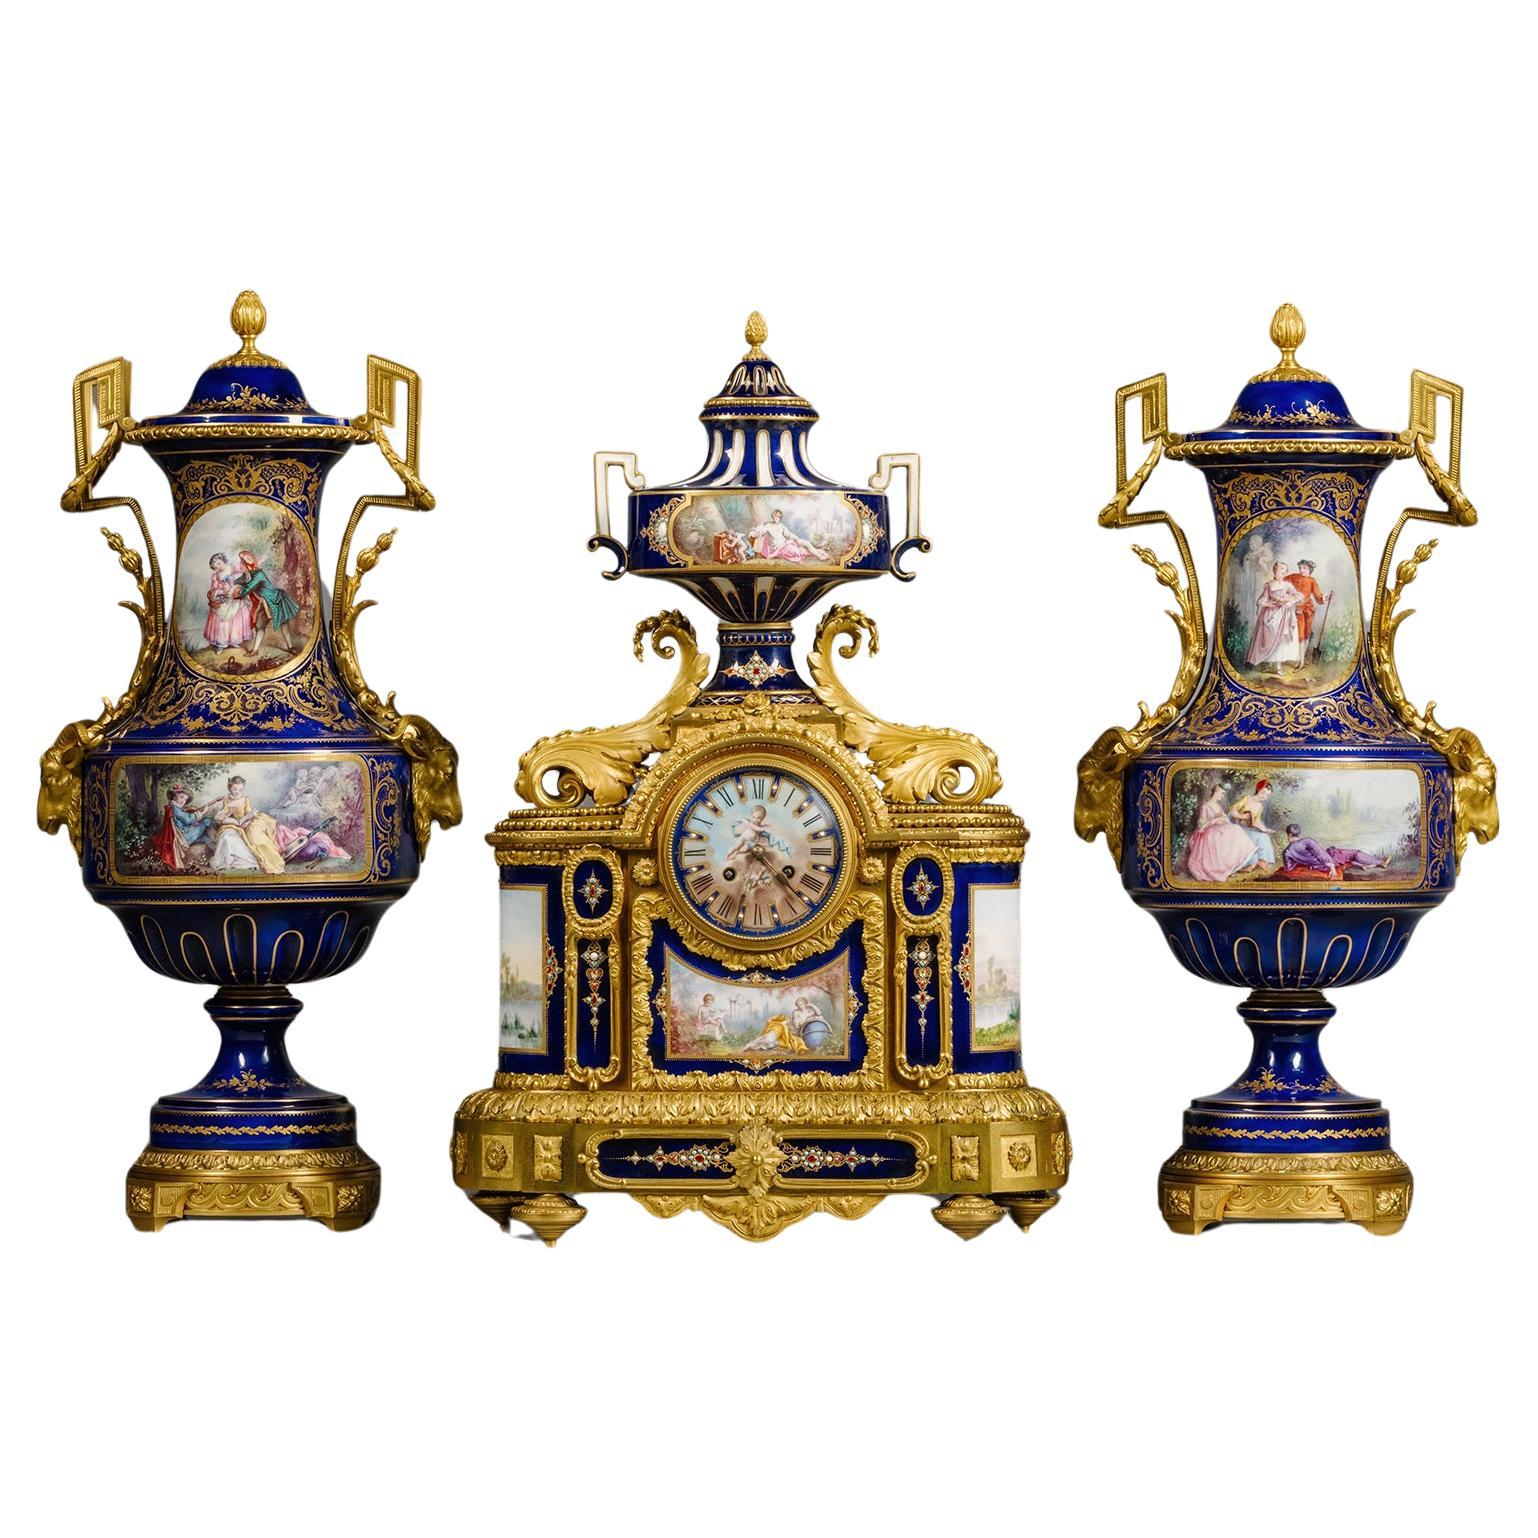 A Large Gilt-Bronze and Sèvres Style Porcelain Three-Piece Clock Garniture For Sale